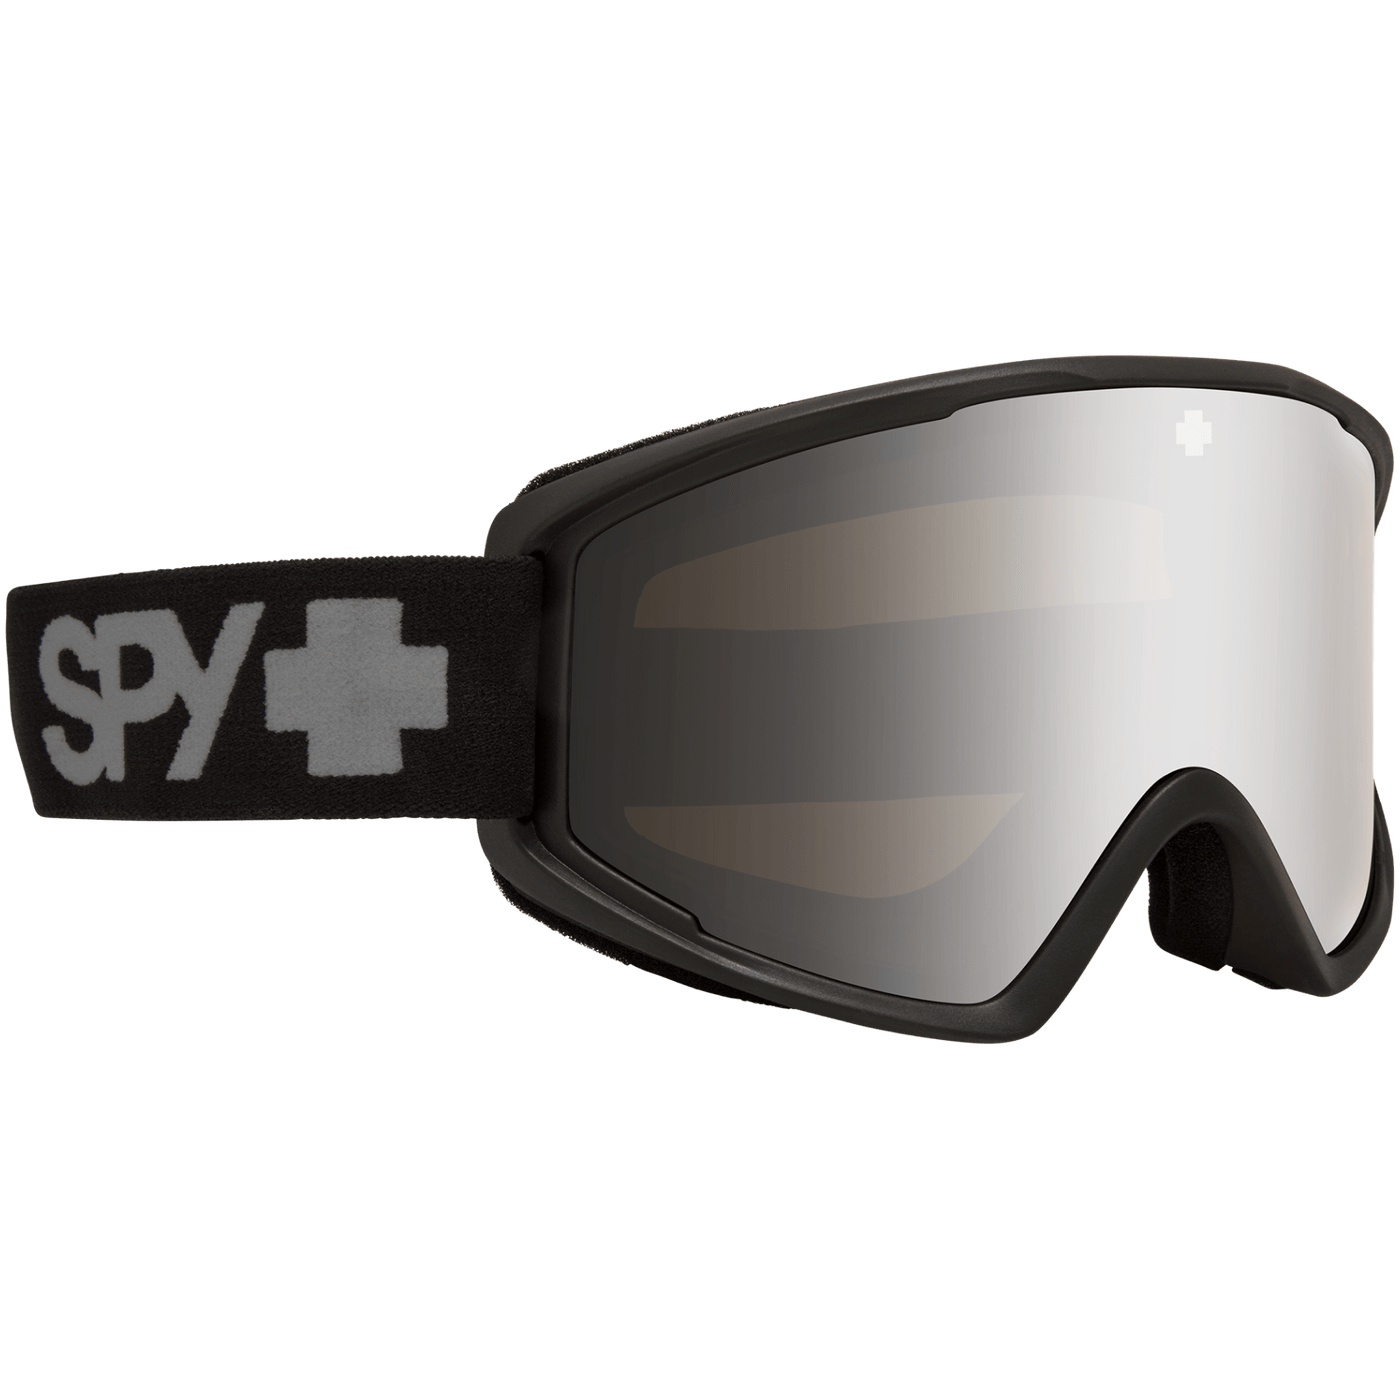 SPY Crusher Elite Snow Goggles - Matte Black 8Lines Shop - Fast Shipping